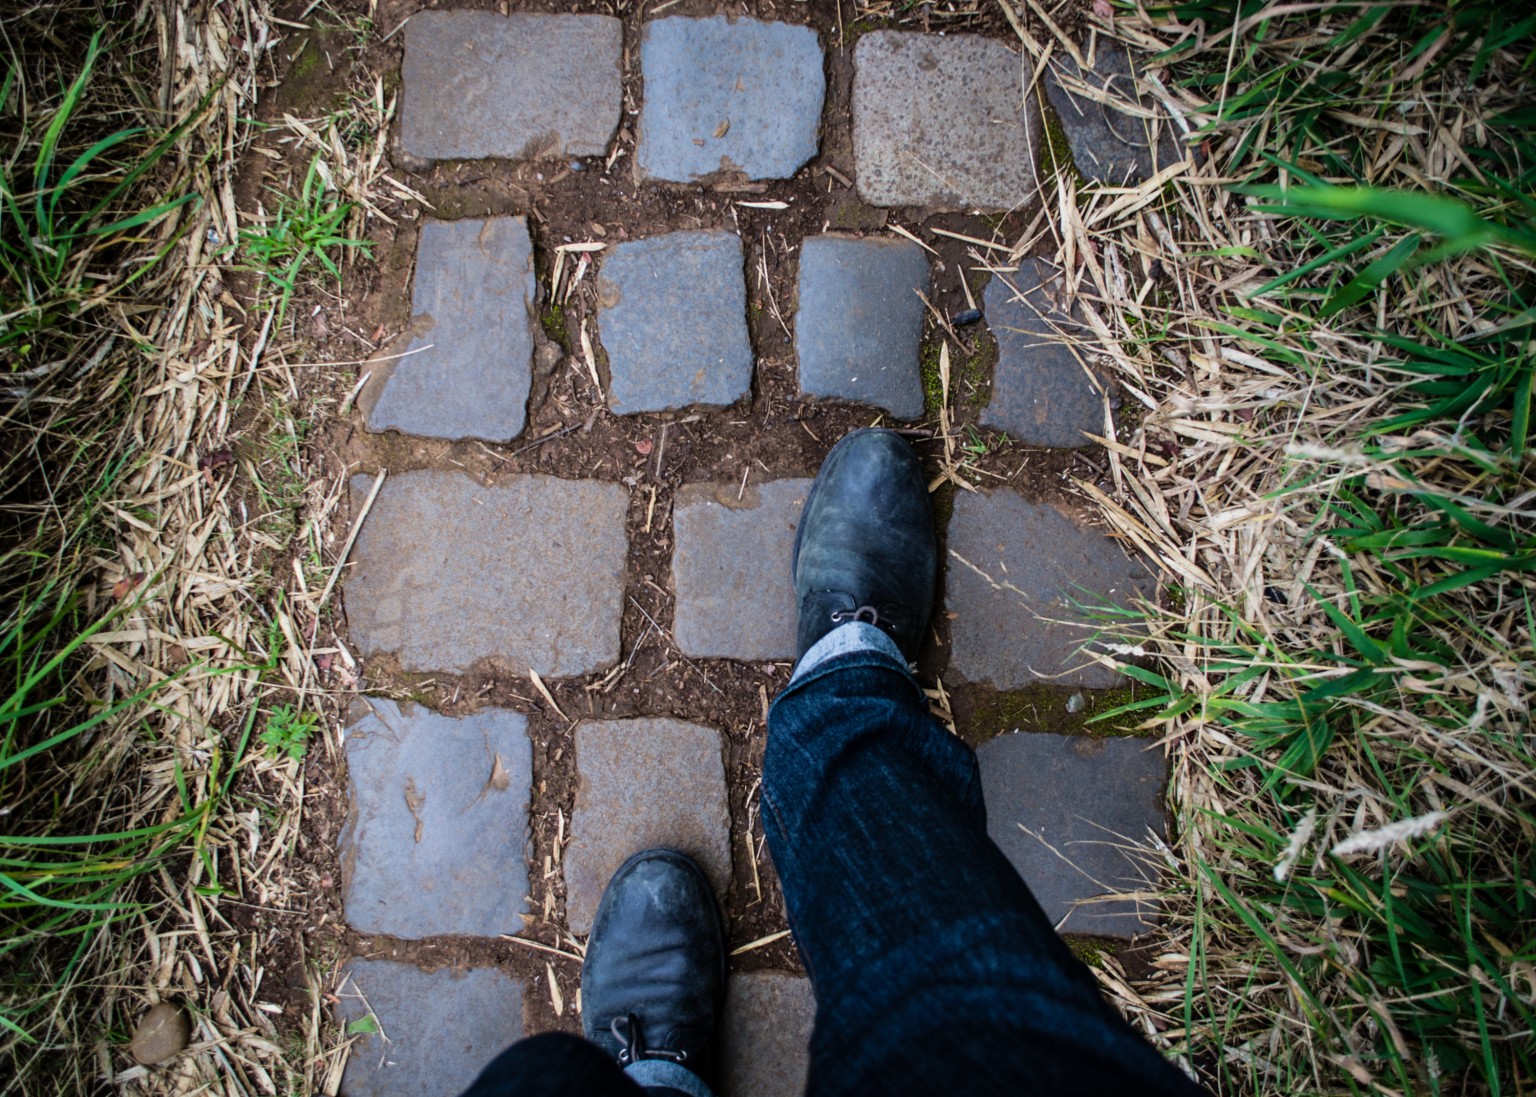 shot of feet of person walking on a cobbled pathway in what looks like a garden or nature path